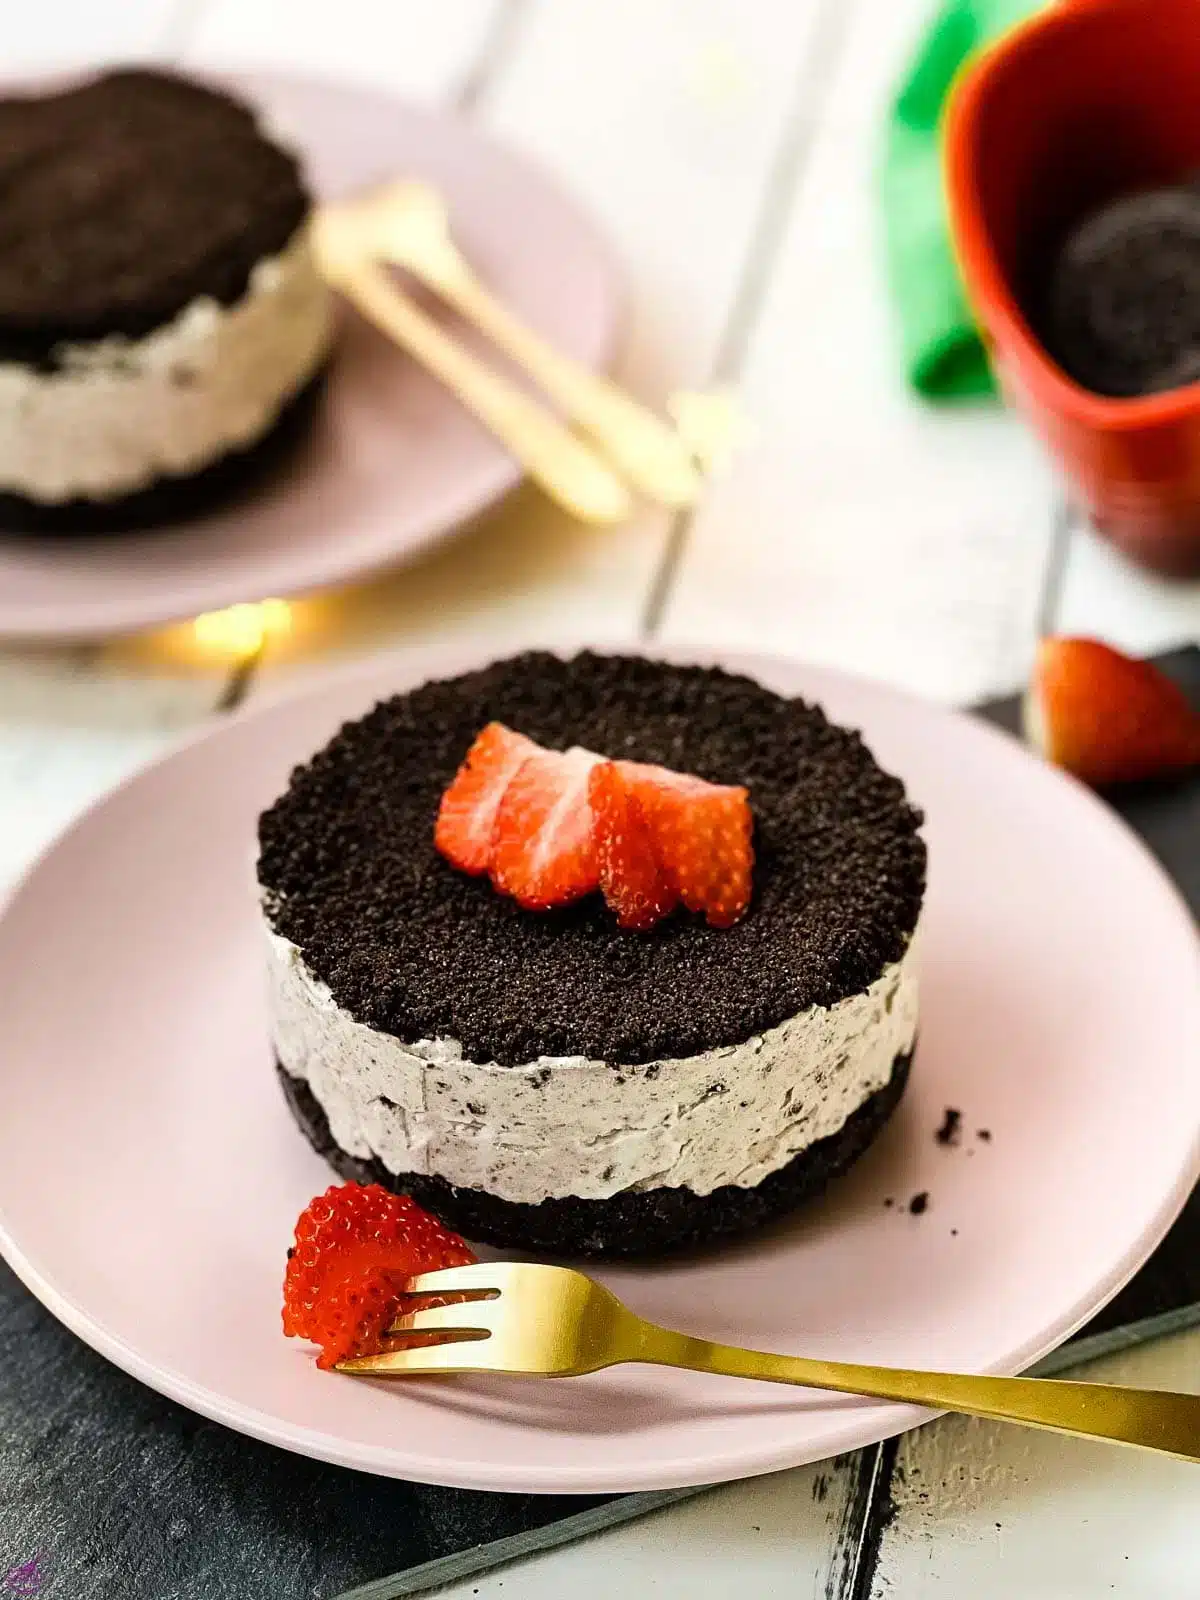 No bake Oreo cheesecake with strawberry slices on a pink plate.